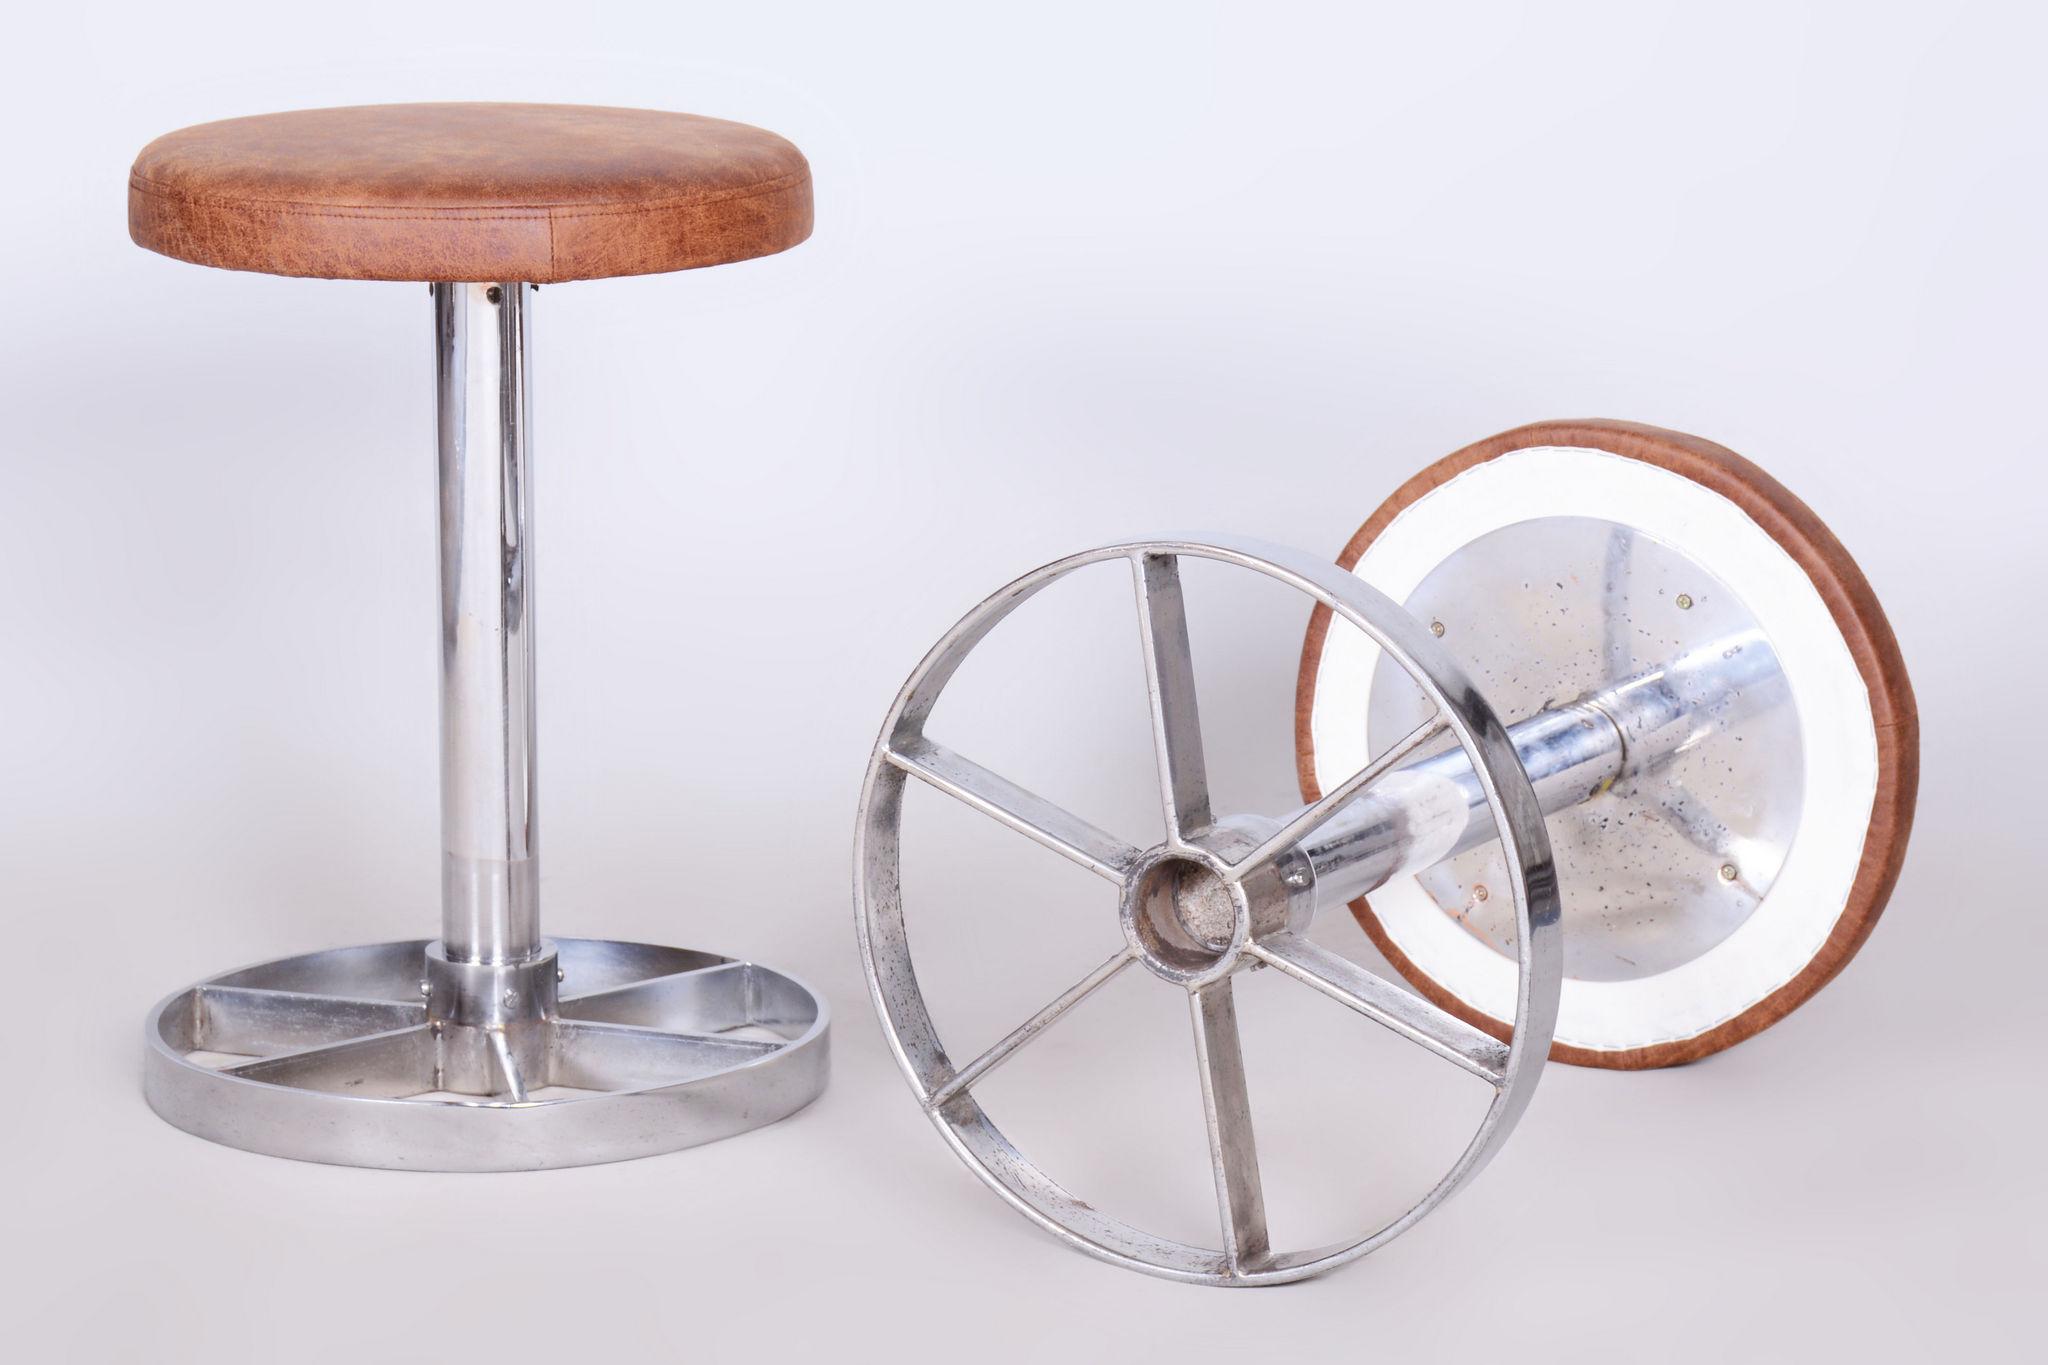 Pair of Bauhaus Chrome-Plated Steel Stools, Brown Leather, Czech, 1930-1939 For Sale 4